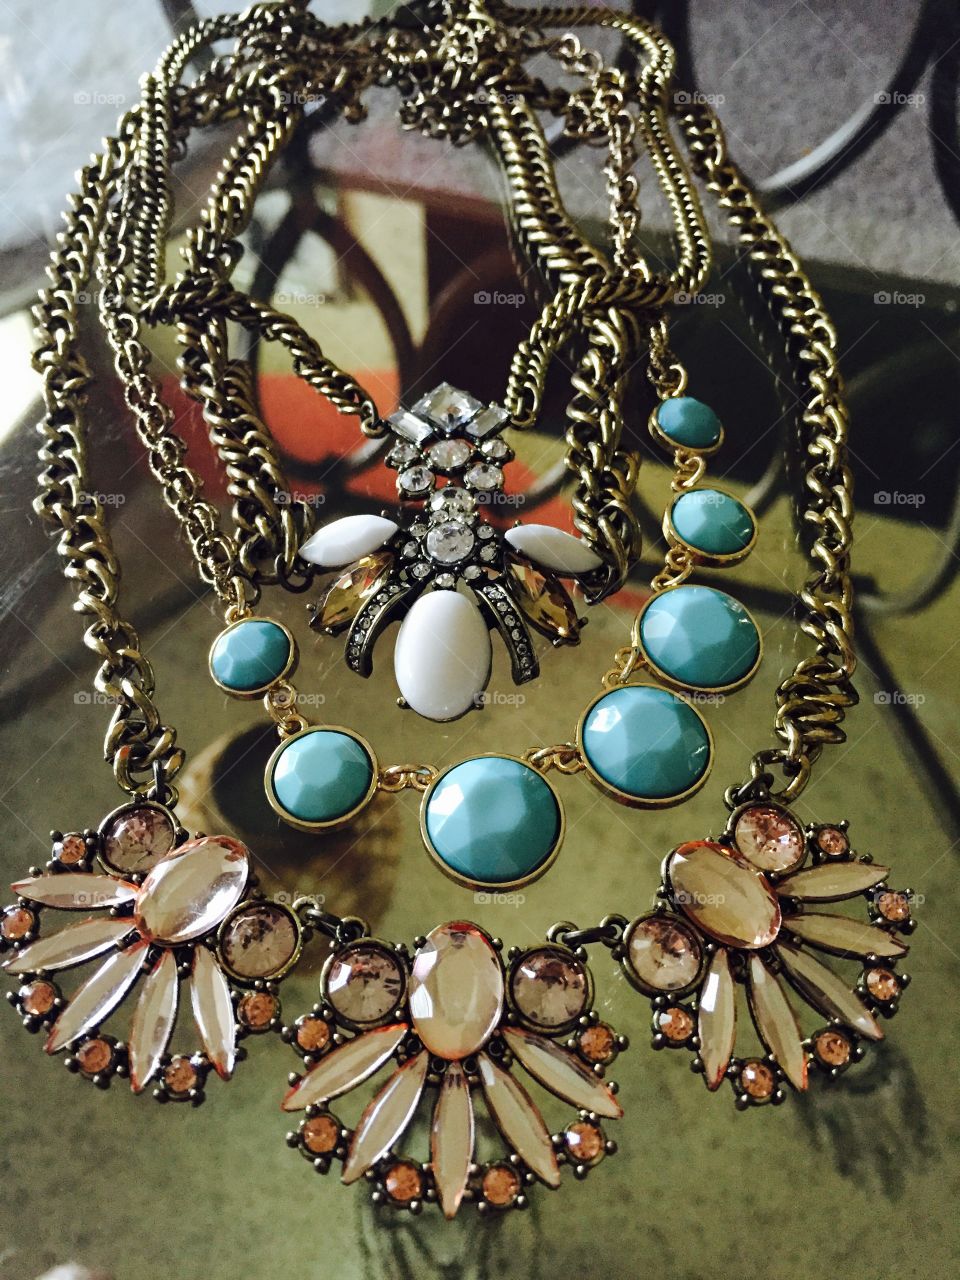 Jewelry. Necklaces layered 